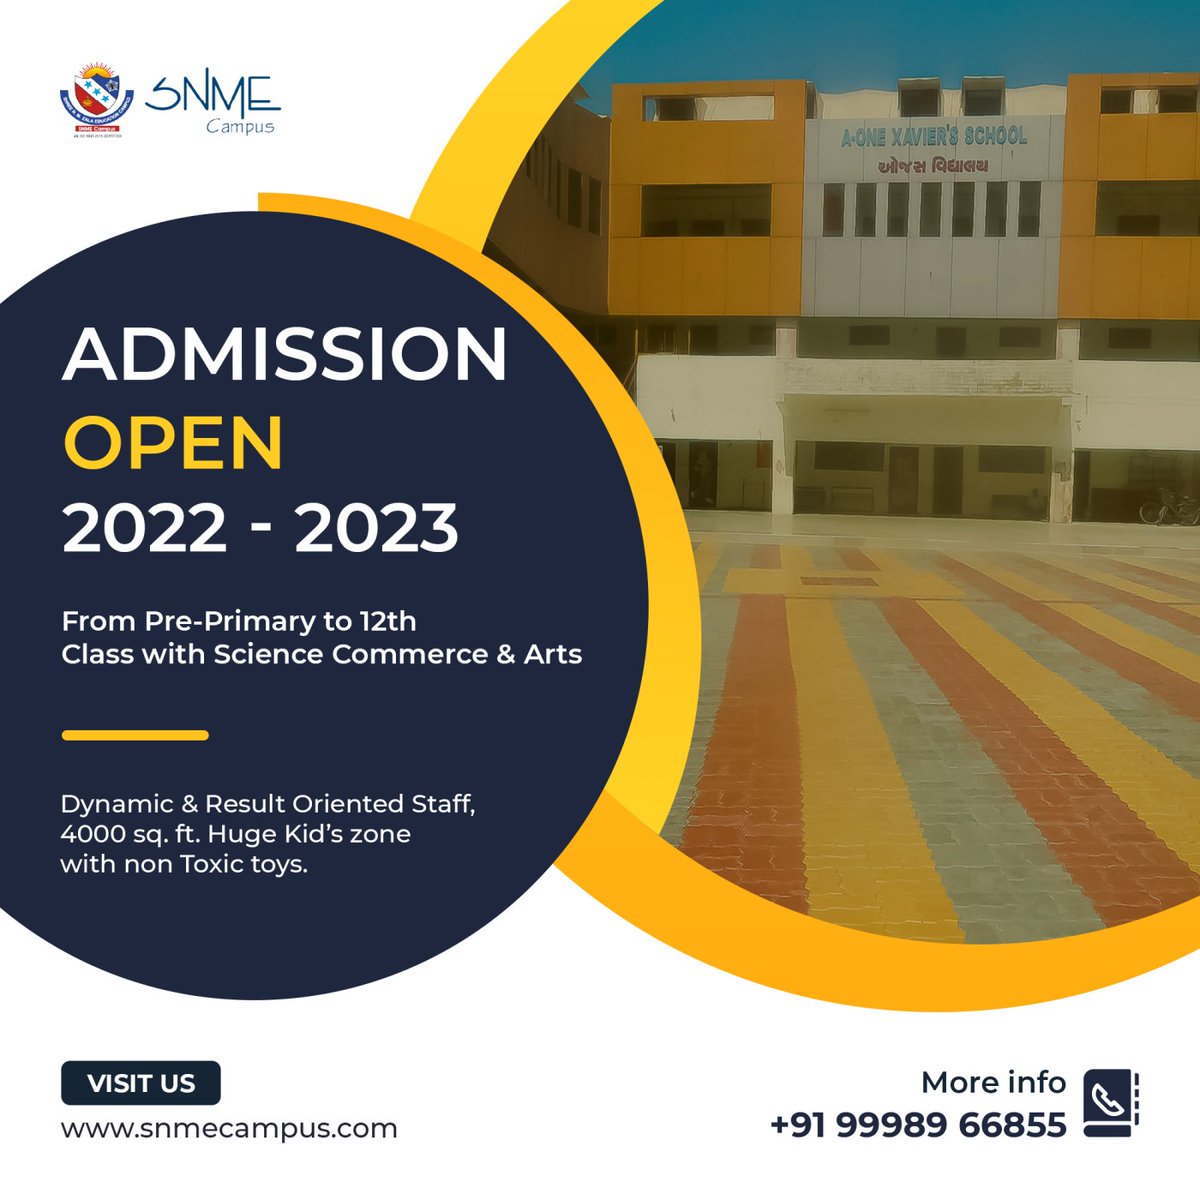 ADMISSION OPEN ⁠
For 2022-23 ⁠
⁠
Pre-Primary to 12th (Science, Commerce & Arts)

Enroll now and experience fun learning.⁠

A-One Xavier's school⁠
SNME Campus⁠
.⁠
.⁠
.⁠
#snmecampus #aonexavierschool #topschools #ahmedabad #ahmedabadschools #enrollnow #admissionsopen2022